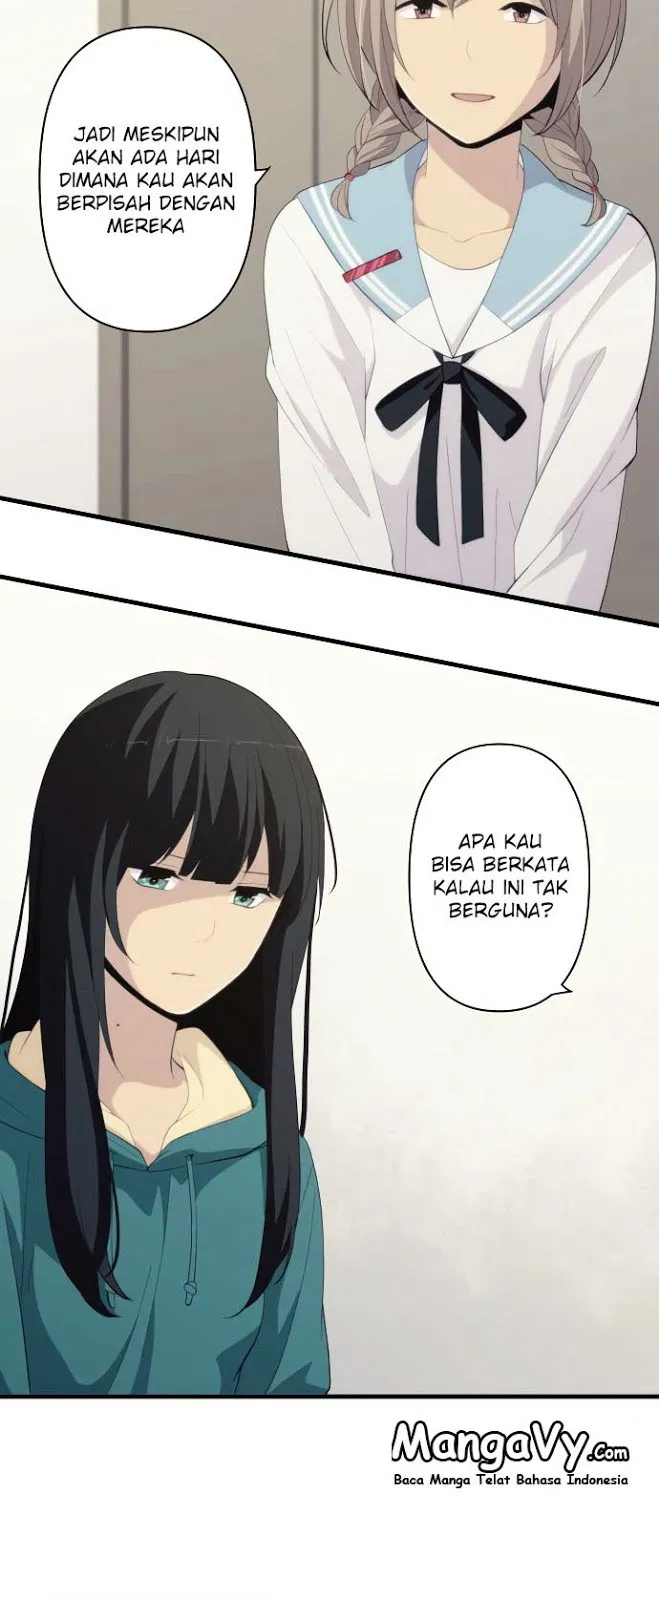 ReLIFE Chapter 181